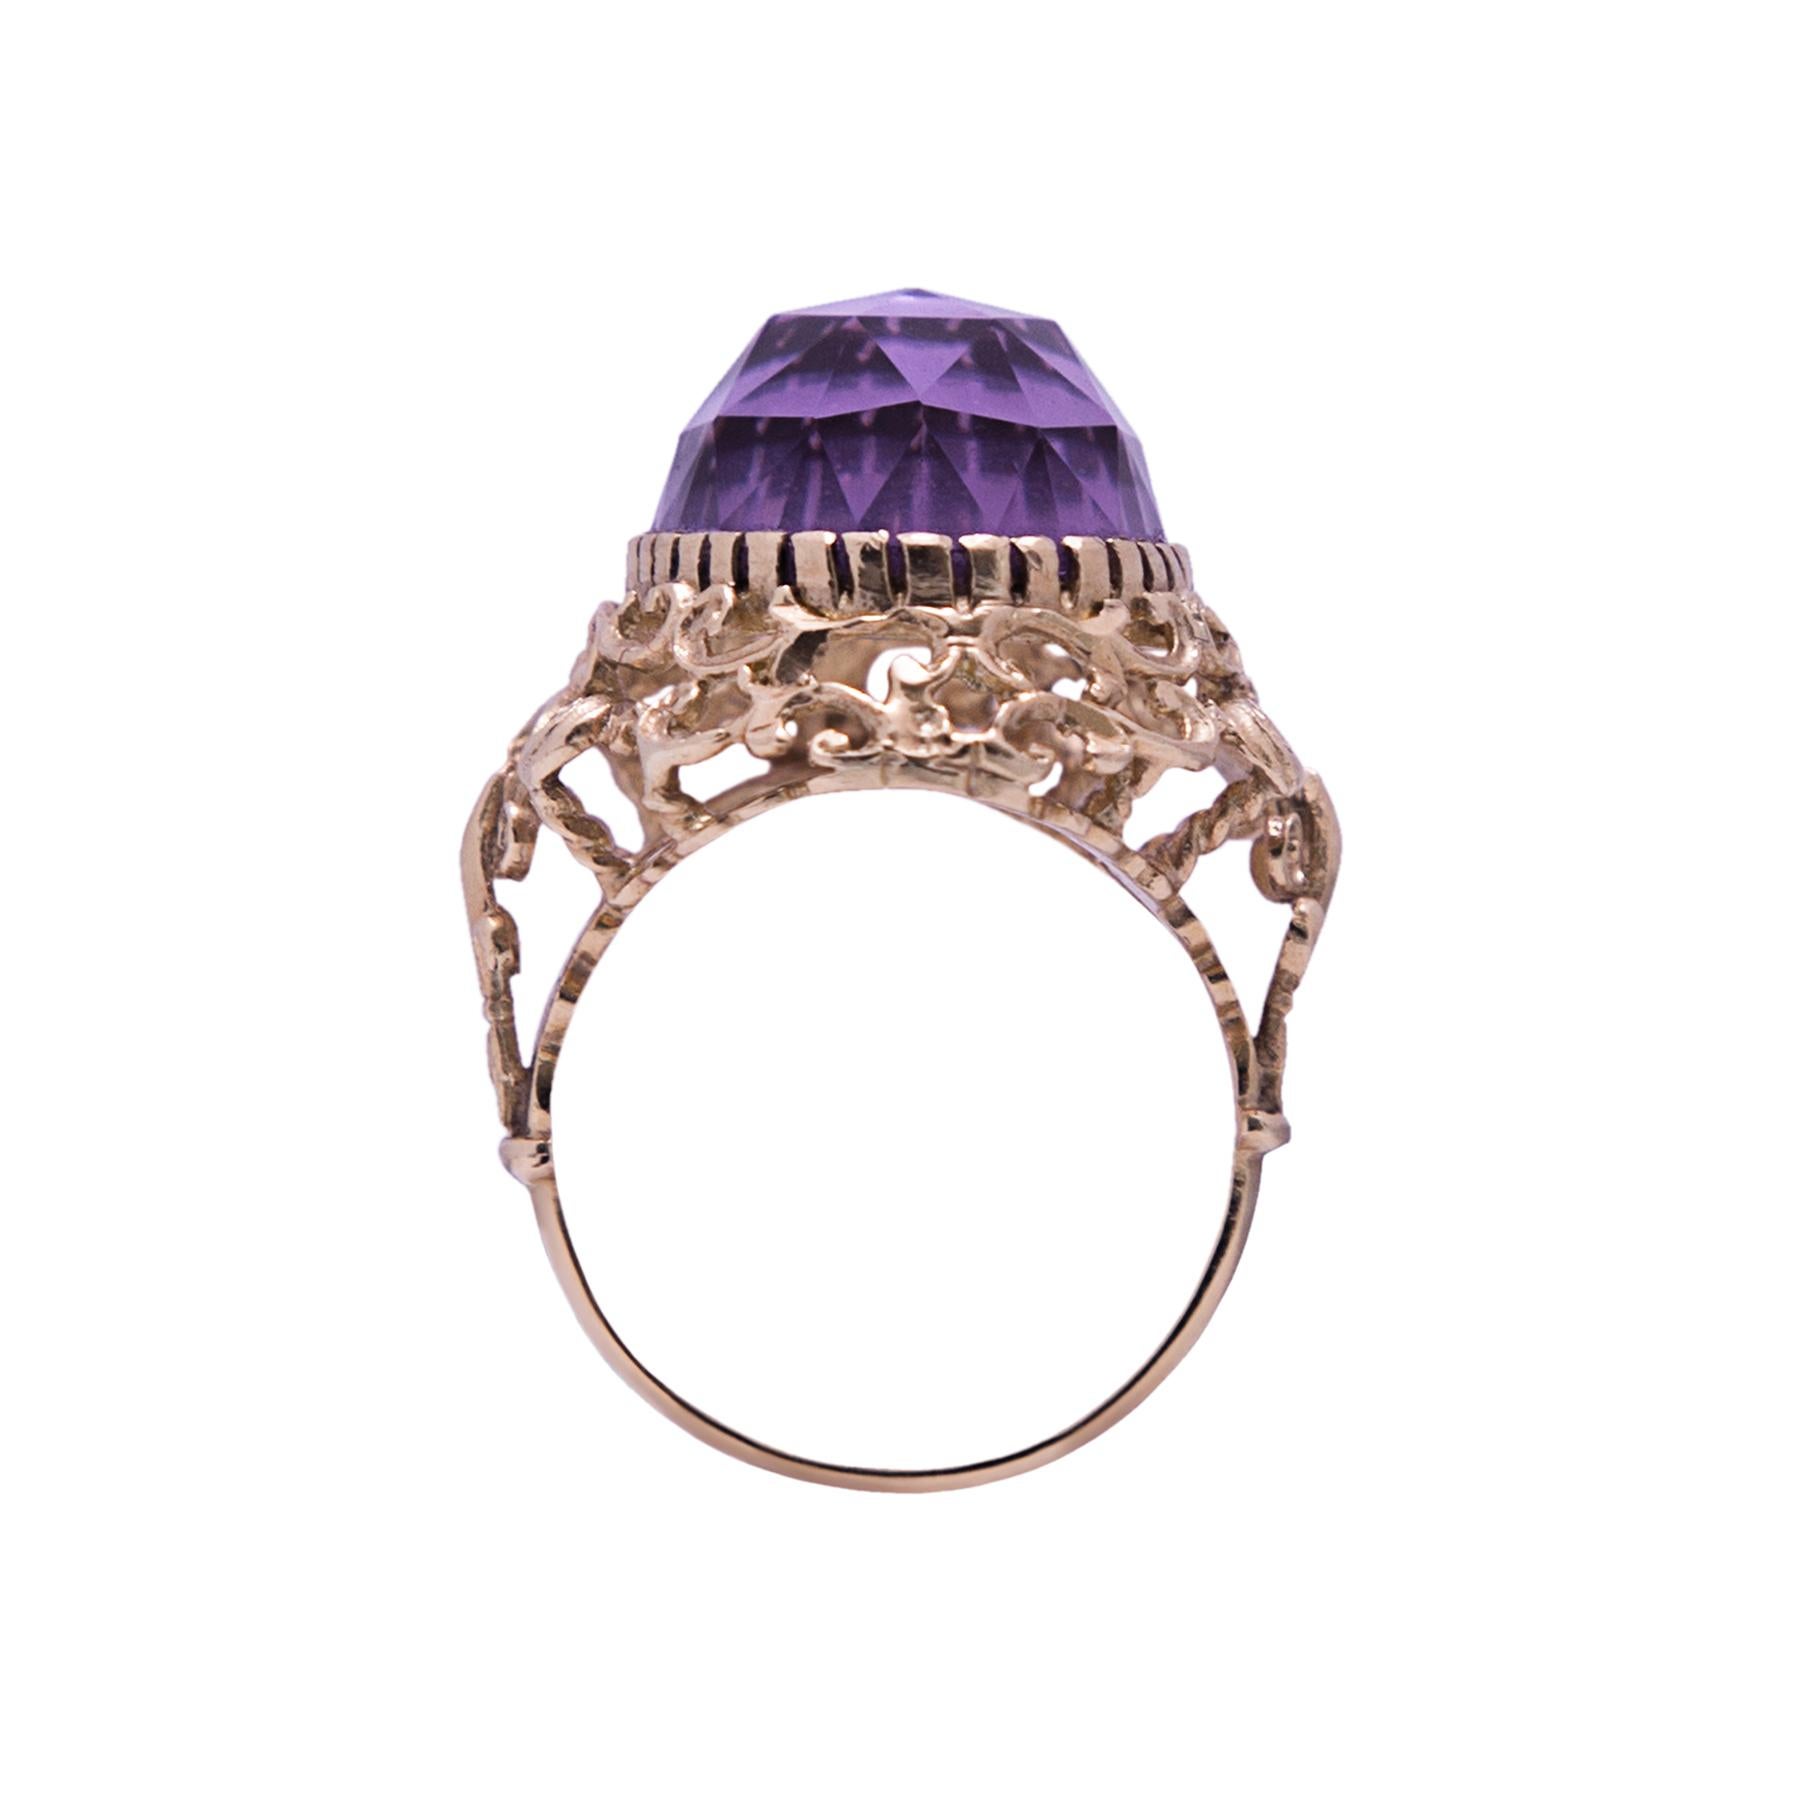 10 grams of solid 18 carat ring with a 4 carat amethyst with a baroque design 